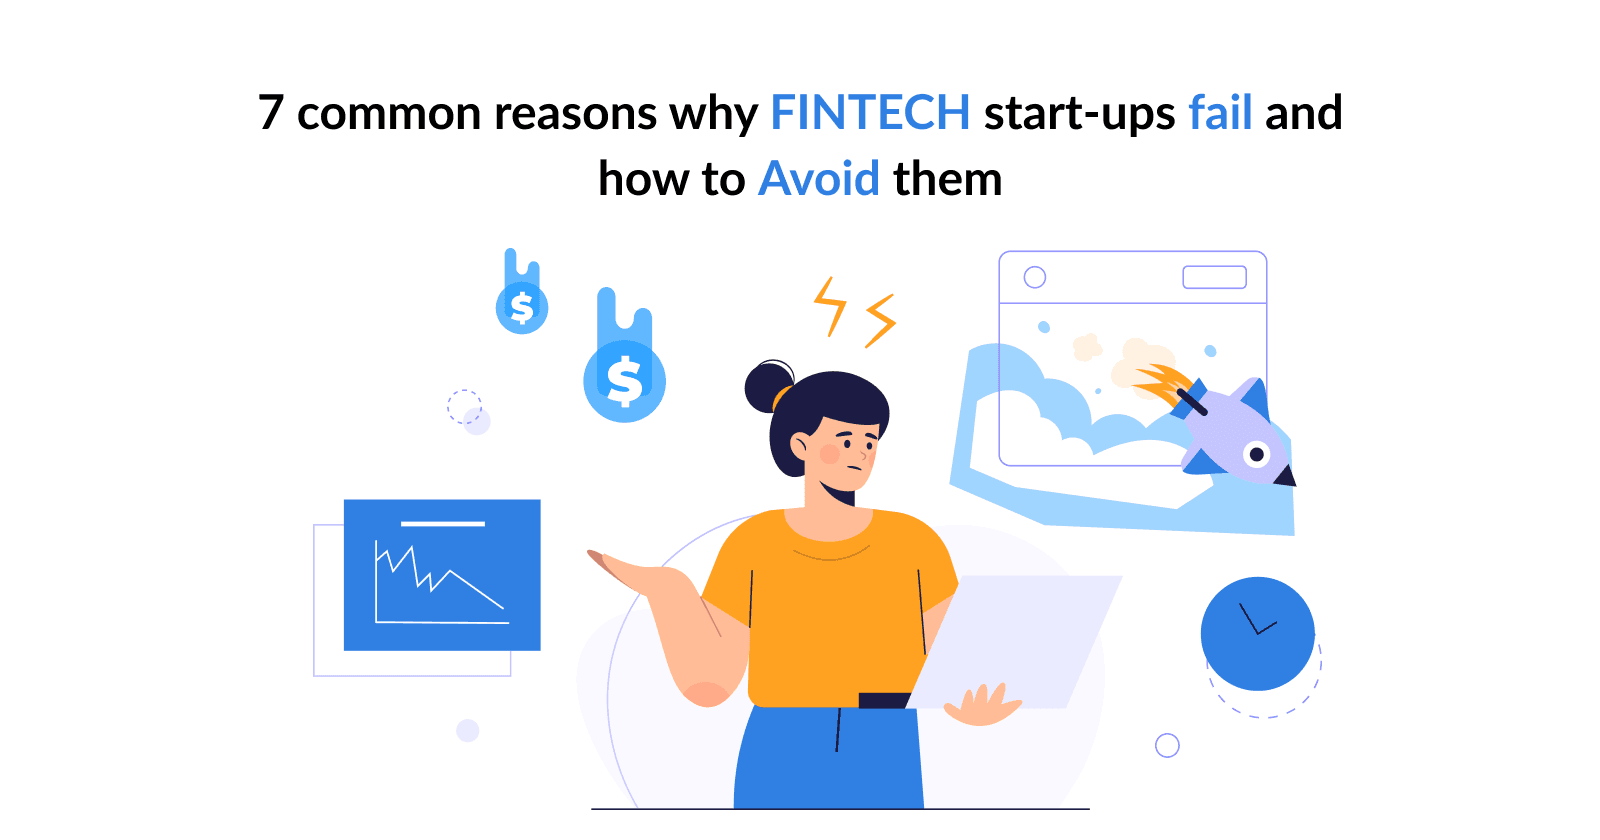 7 common reasons why fintech start-ups fail and how to avoid them